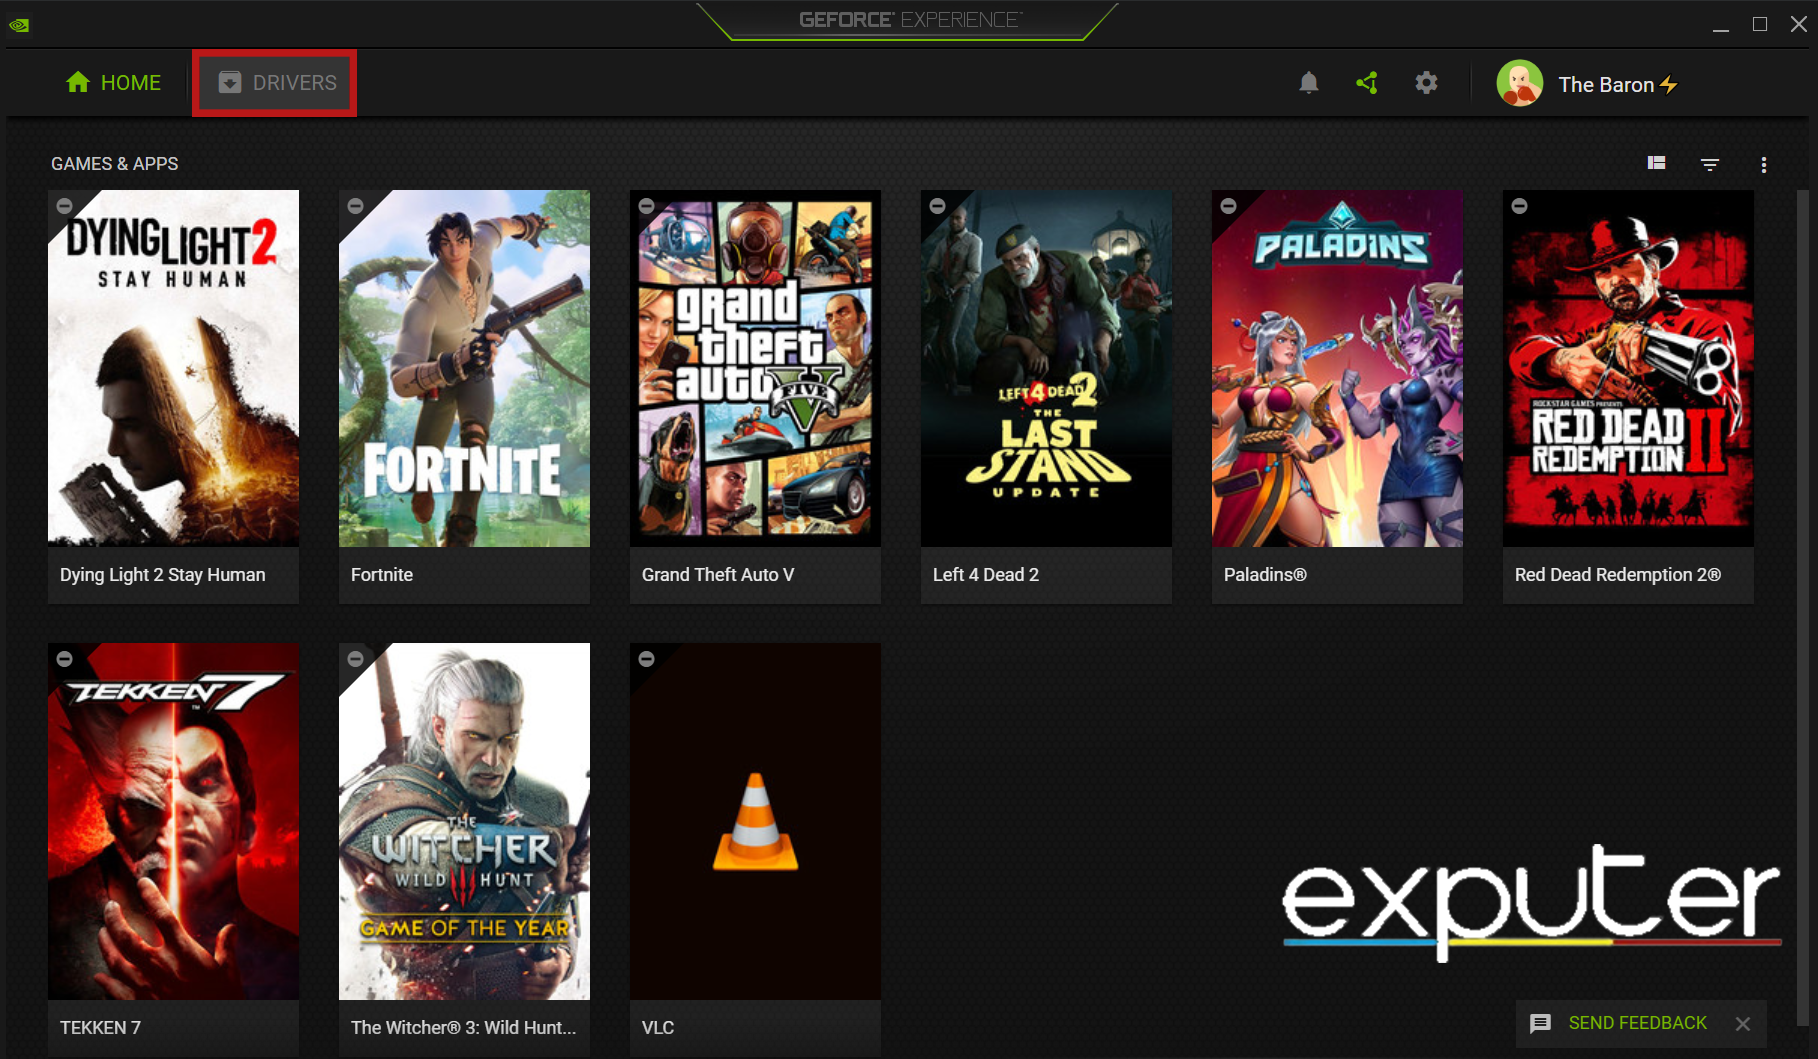 Opening Drivers tab in the GeForce Experience. (image copyrighted by eXputer)